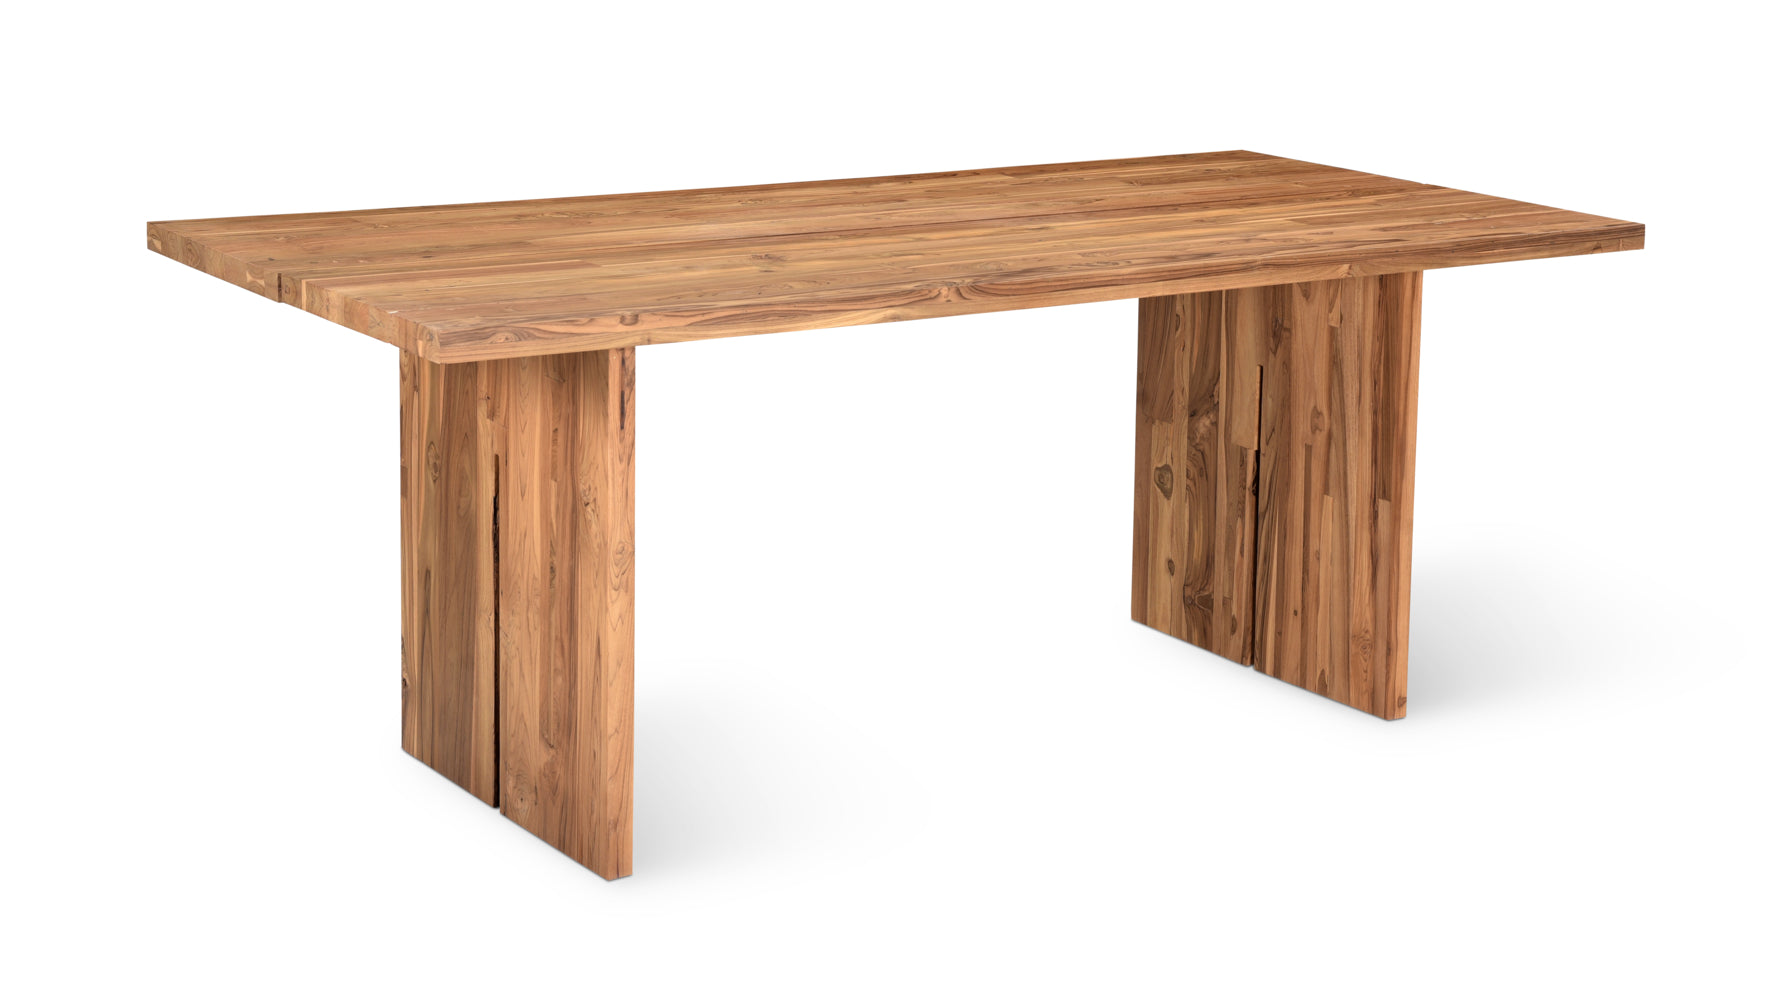 Plane Outdoor Dining Table, Seats 8-10, Teak - Image 1